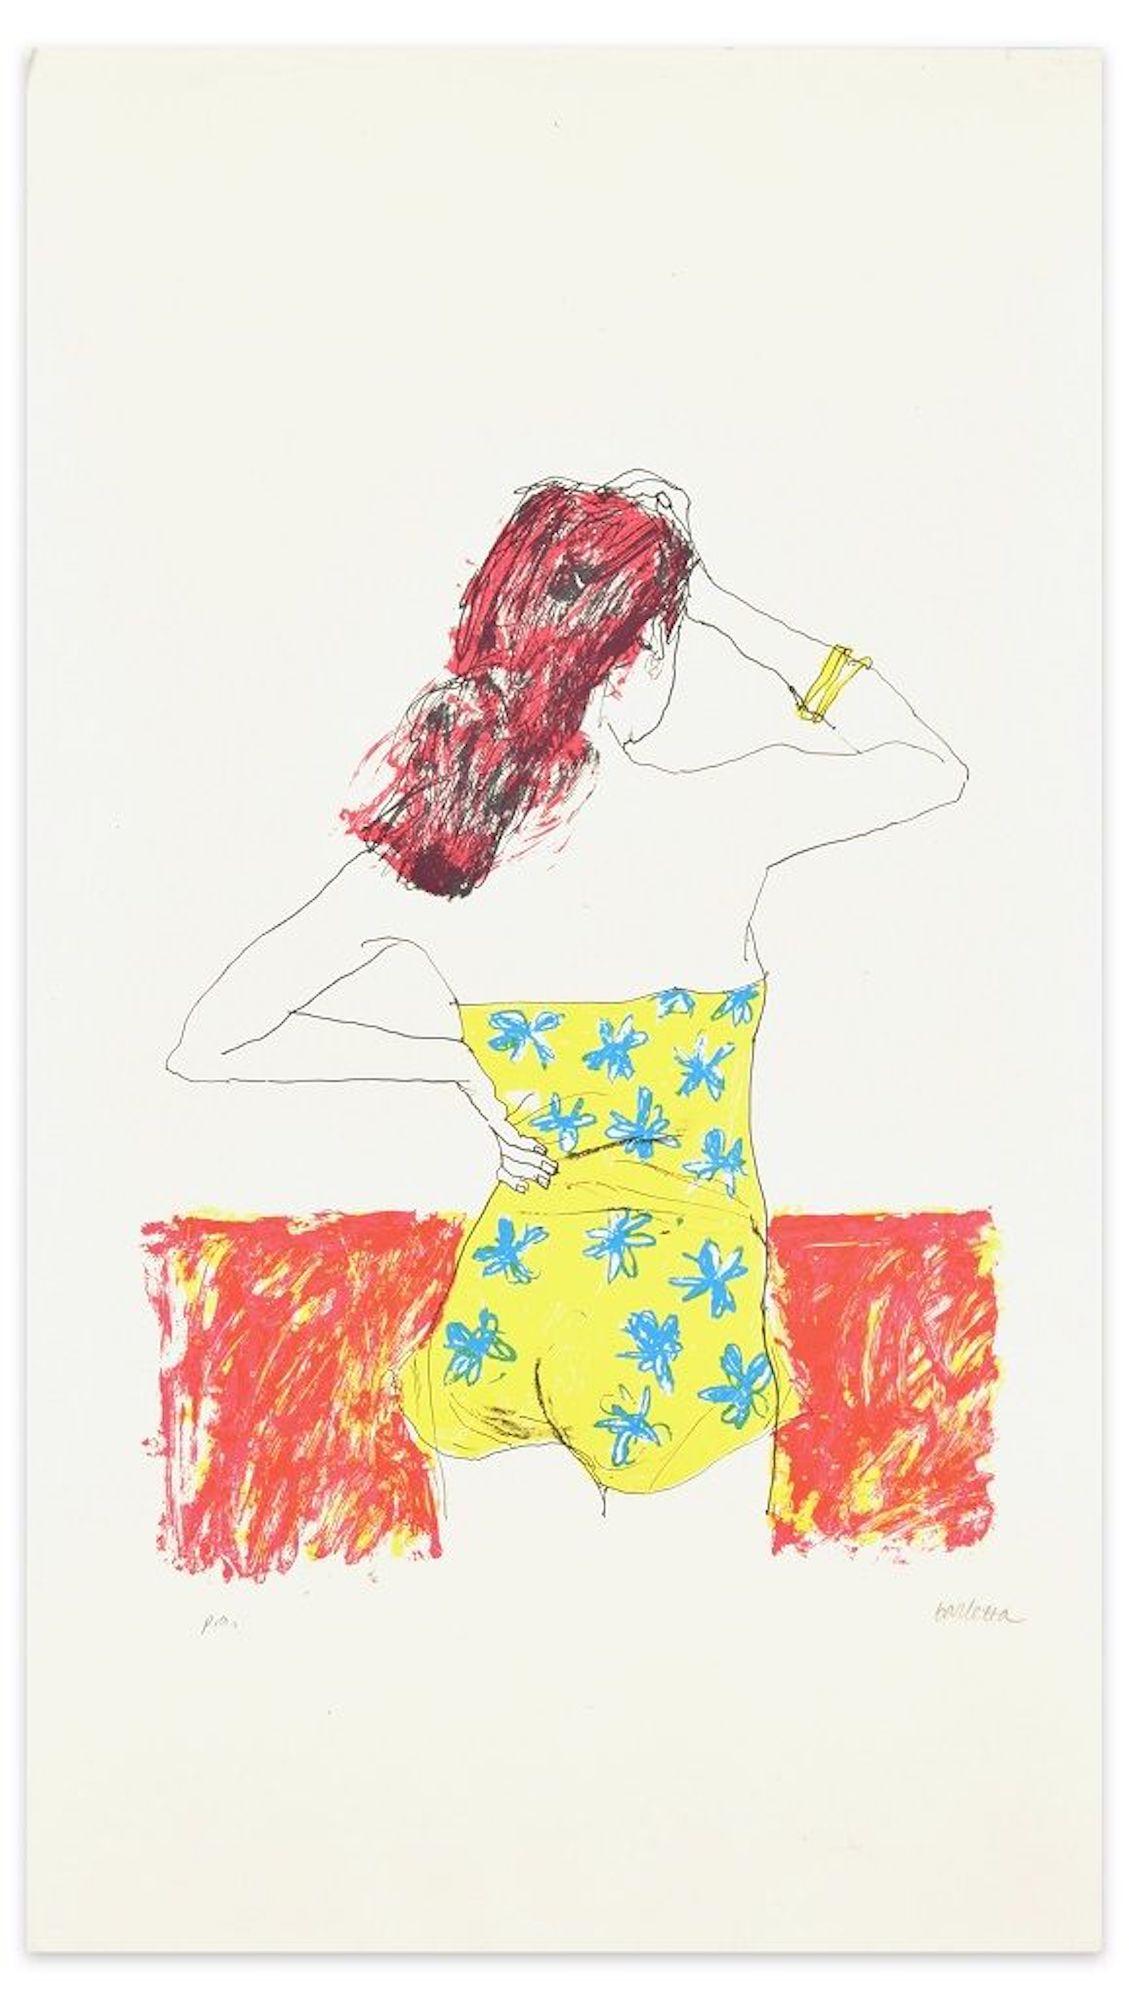 Female Figure is a beautiful original color lithograph on paper, realized by the Italian artist Sergio Barletta (Bologna, 1934) at the Seventies.

Hand-signed in pencil on lower right margin, this is an artist's proof, as the abbreviation in pencil